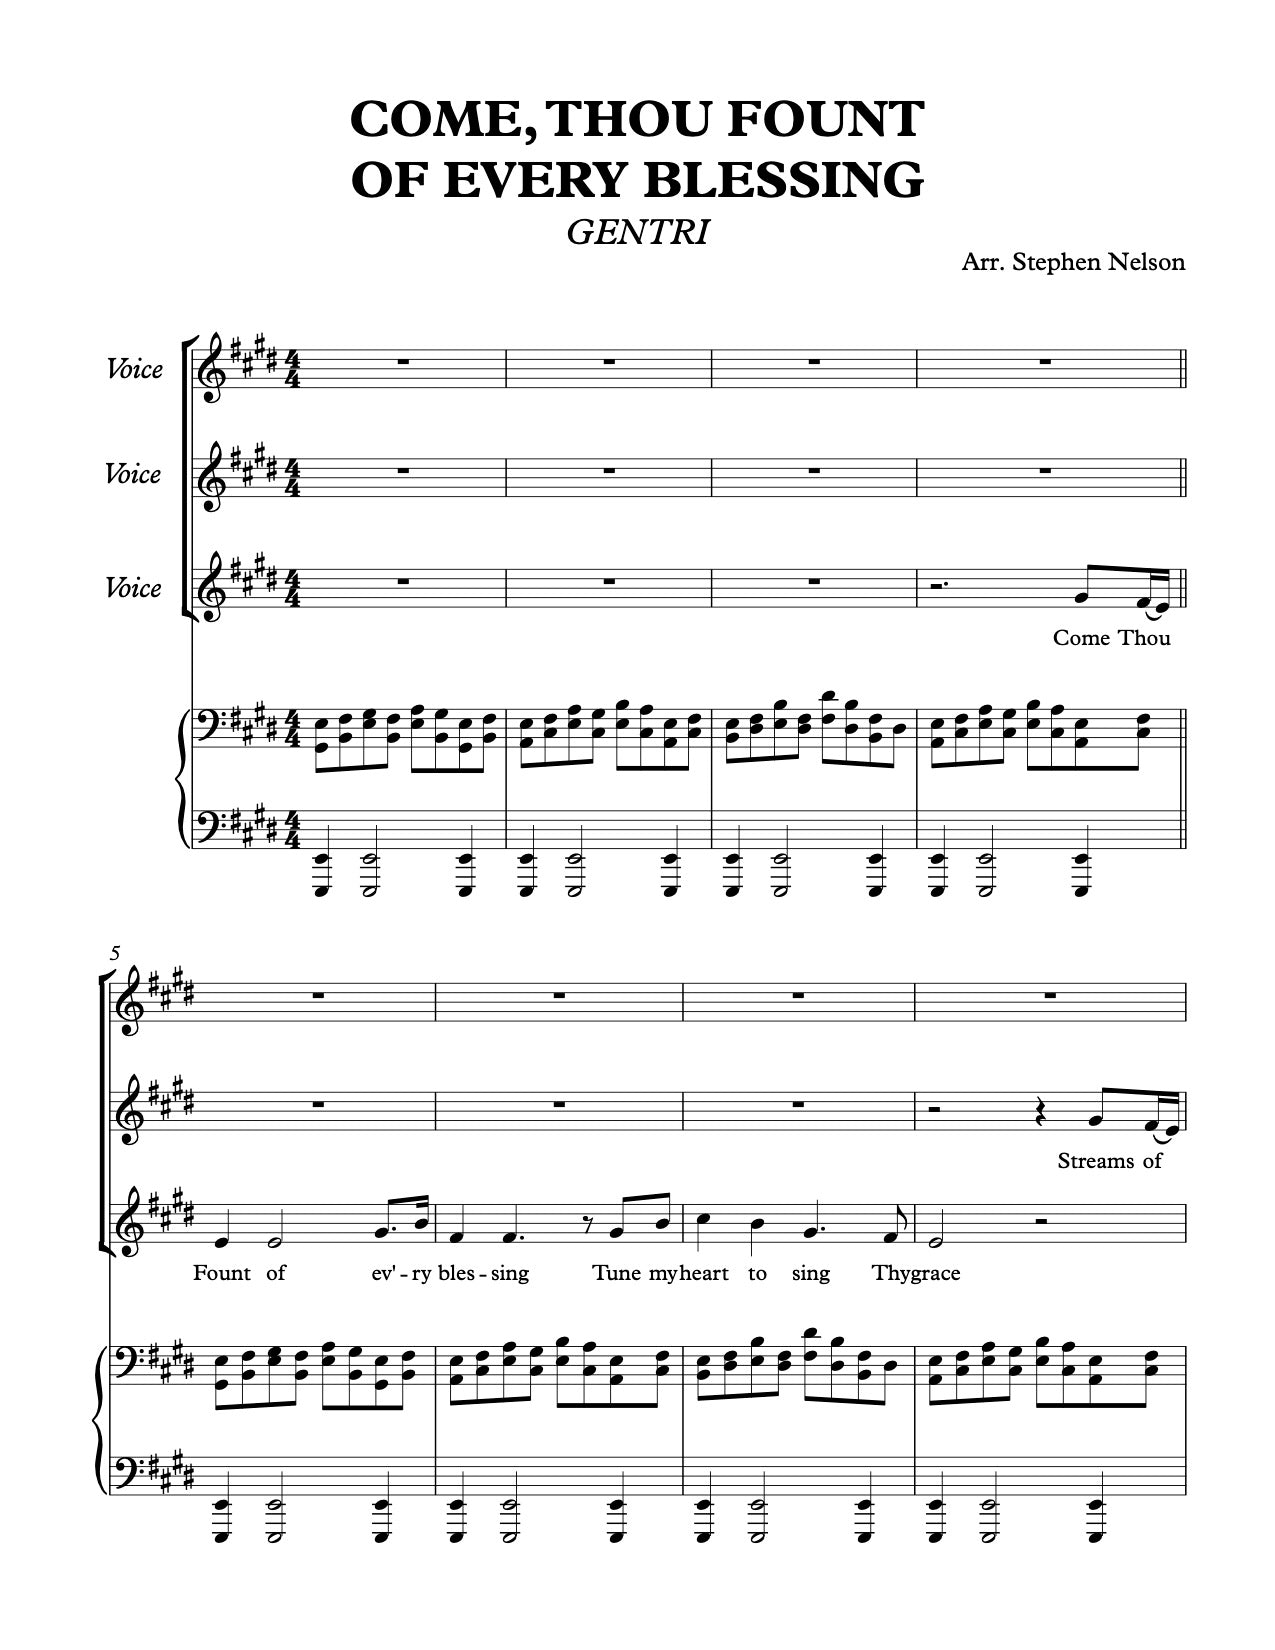 Come Thou Fount of Every Blessing Sheet Music